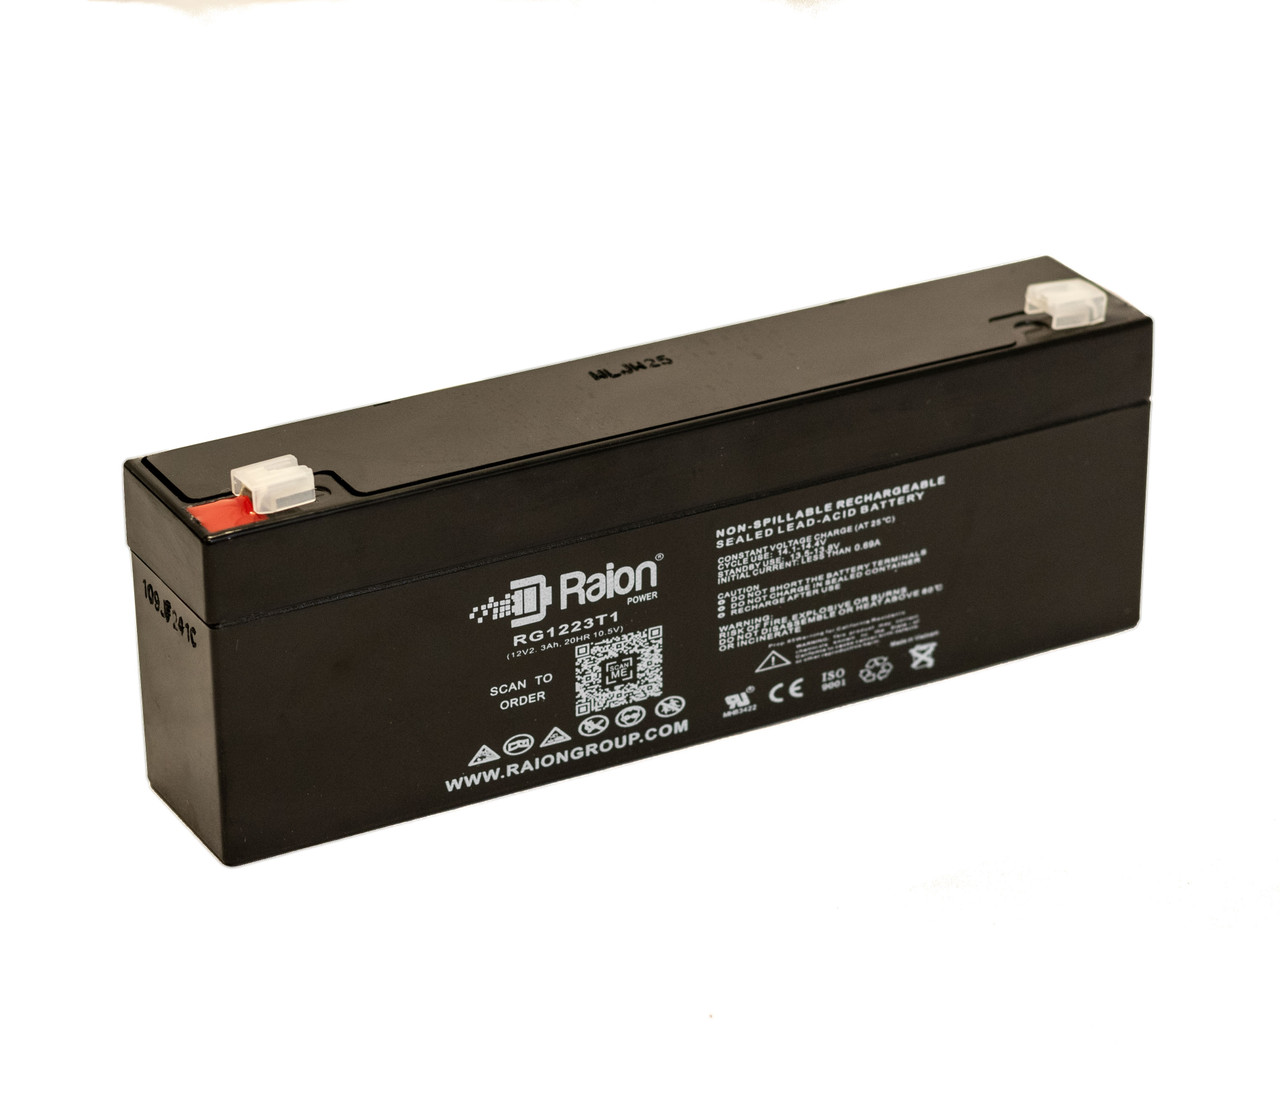 Raion Power RG1223T1 Replacement Battery for Spacelabs Medical 2446 Systems Recorder